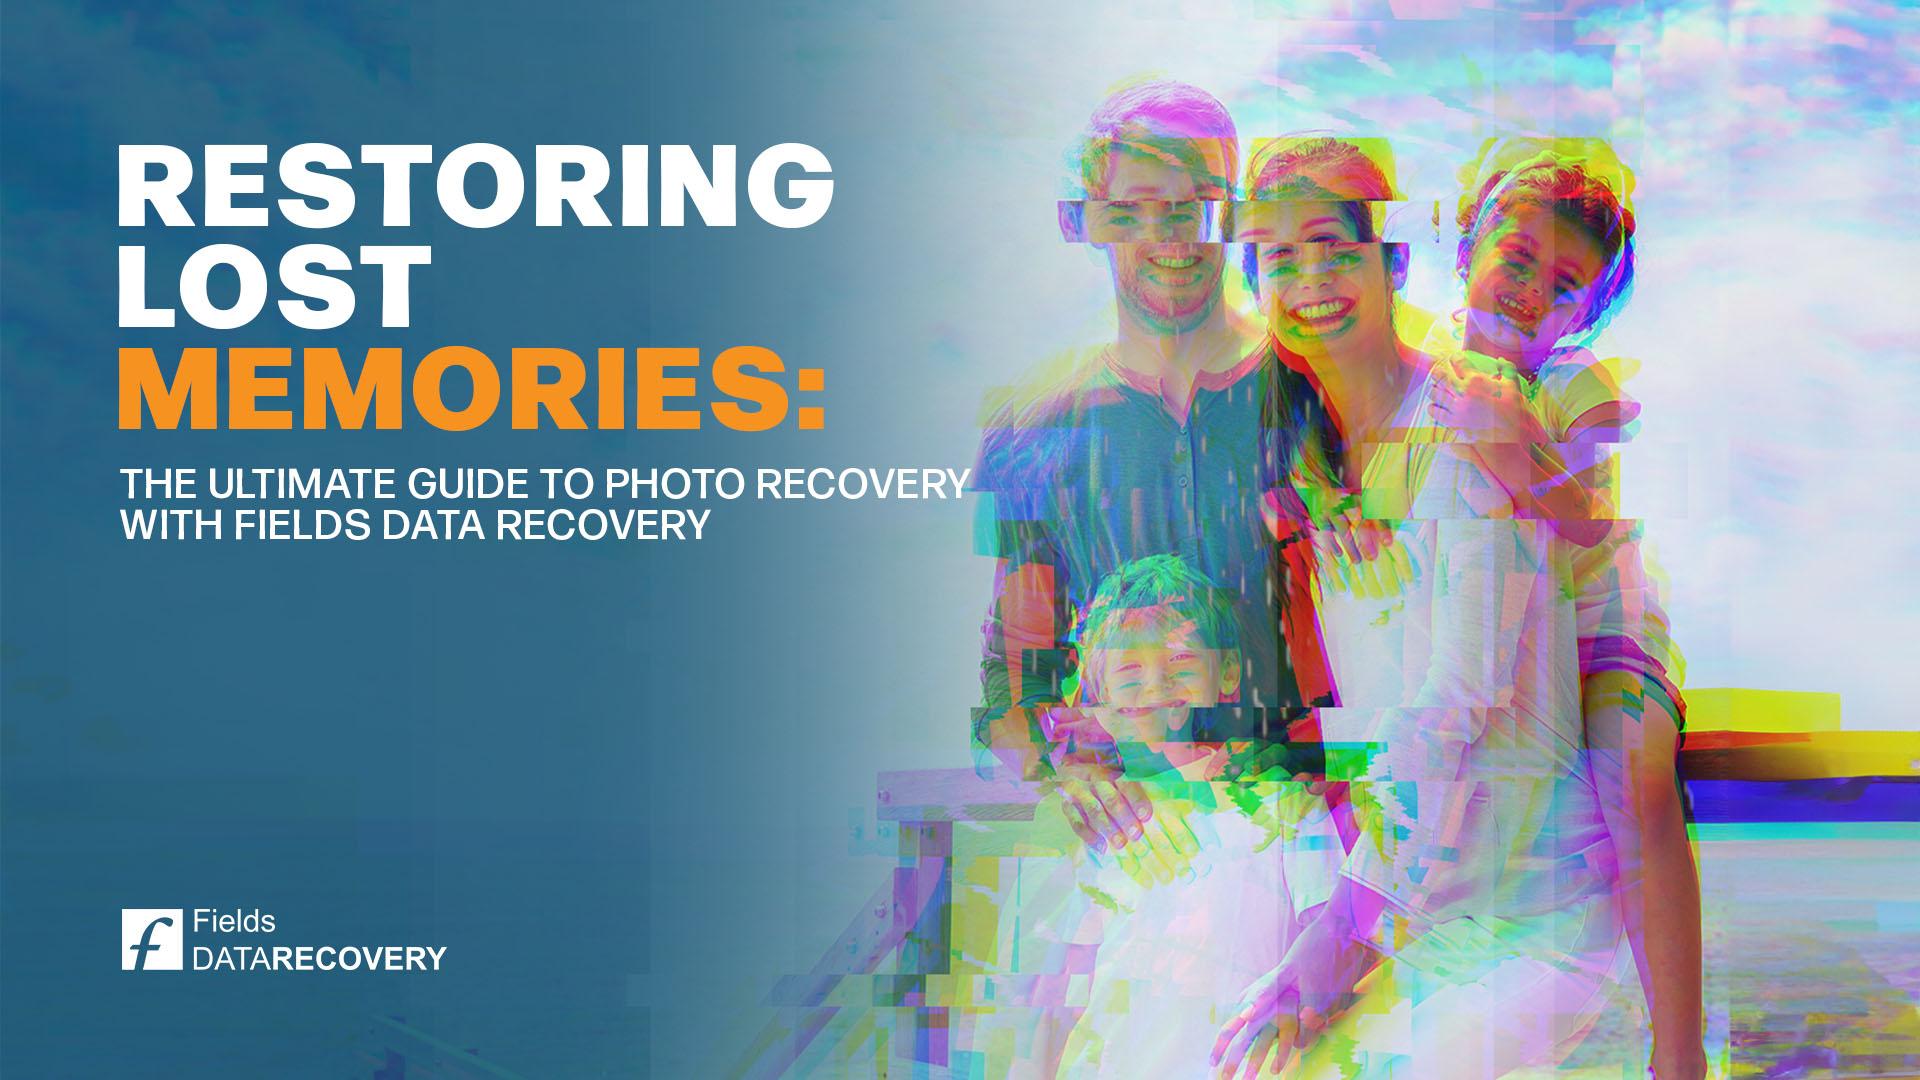 Restoring Lost Memories: The Ultimate Guide to Photo Recovery with Fields Data Recovery